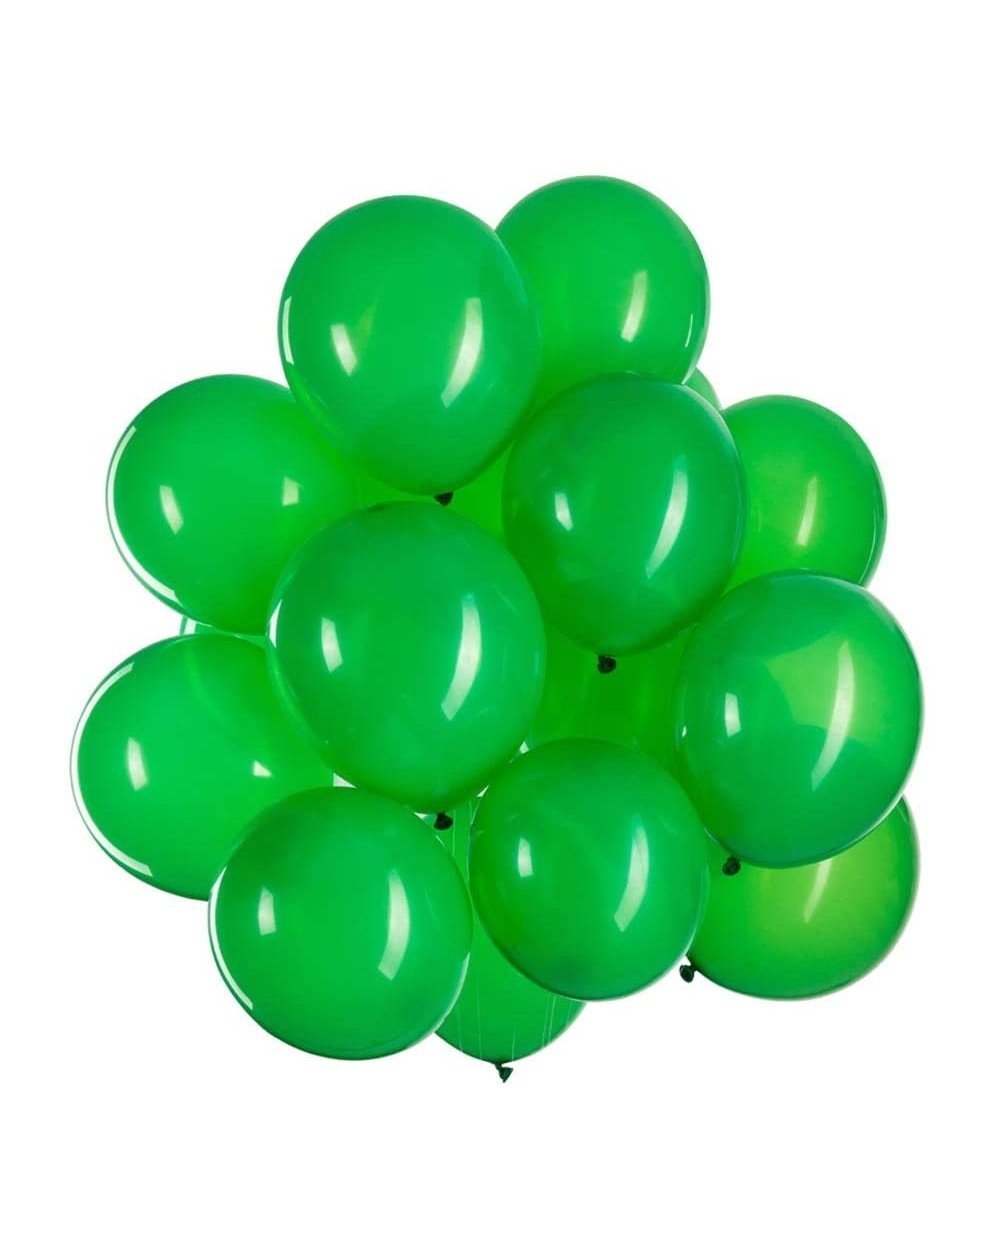 Balloons 12 Inch Green Balloons Helium Light Green Latex Balloons for Birthday Party Decorations Supplies Pack of 35-Thick 3....